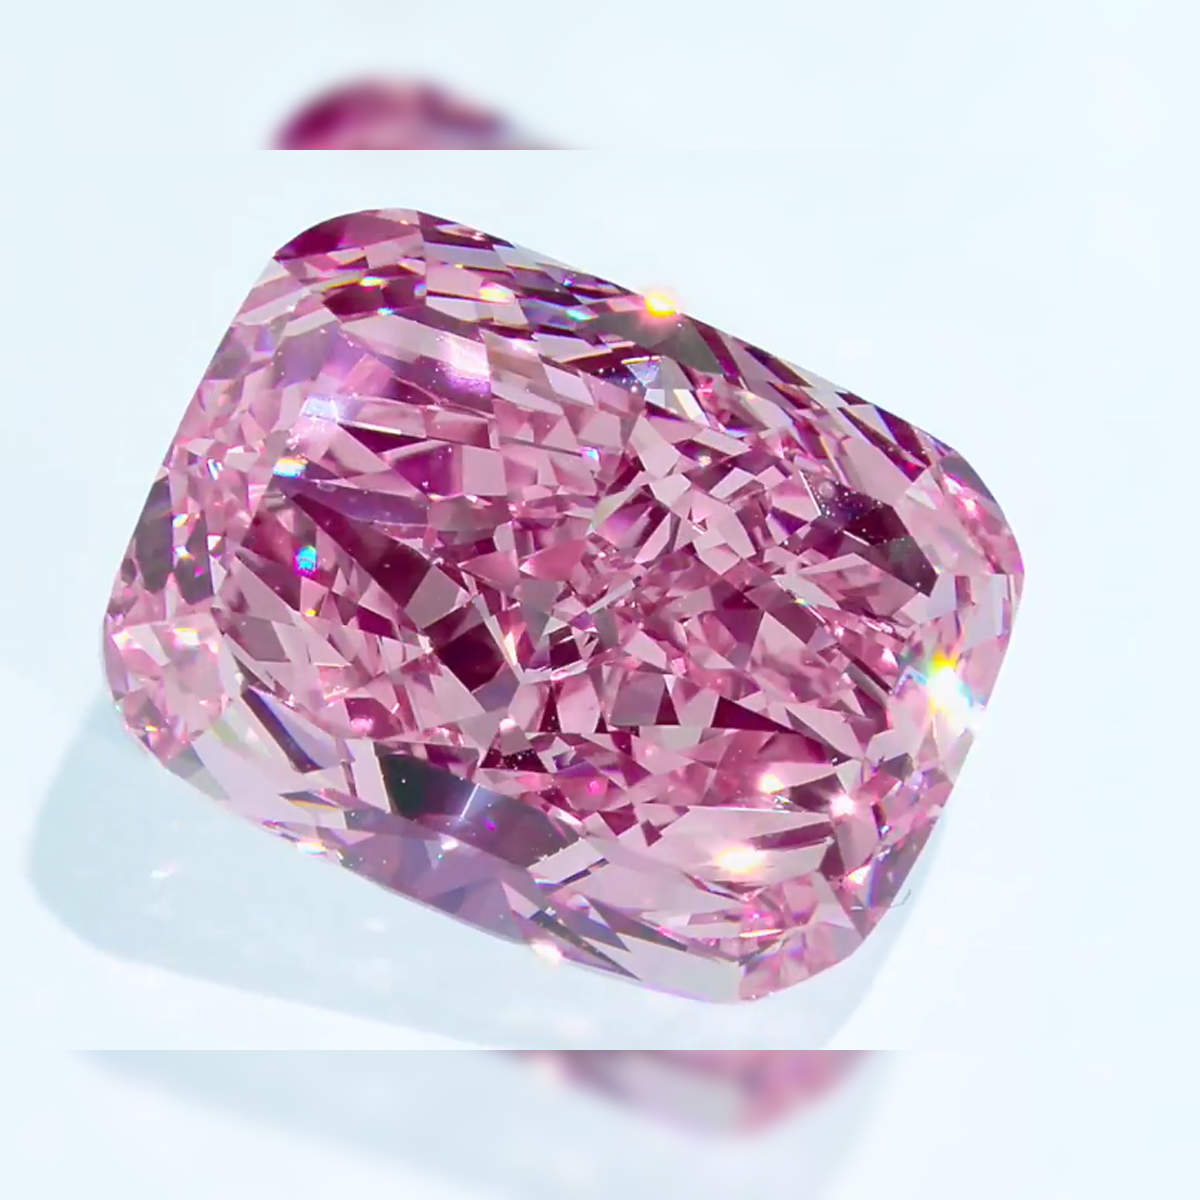 HOW TO COMPLETE EVERY TROPHY CASE FOR FREE PINK DIAMONDS! EVERY